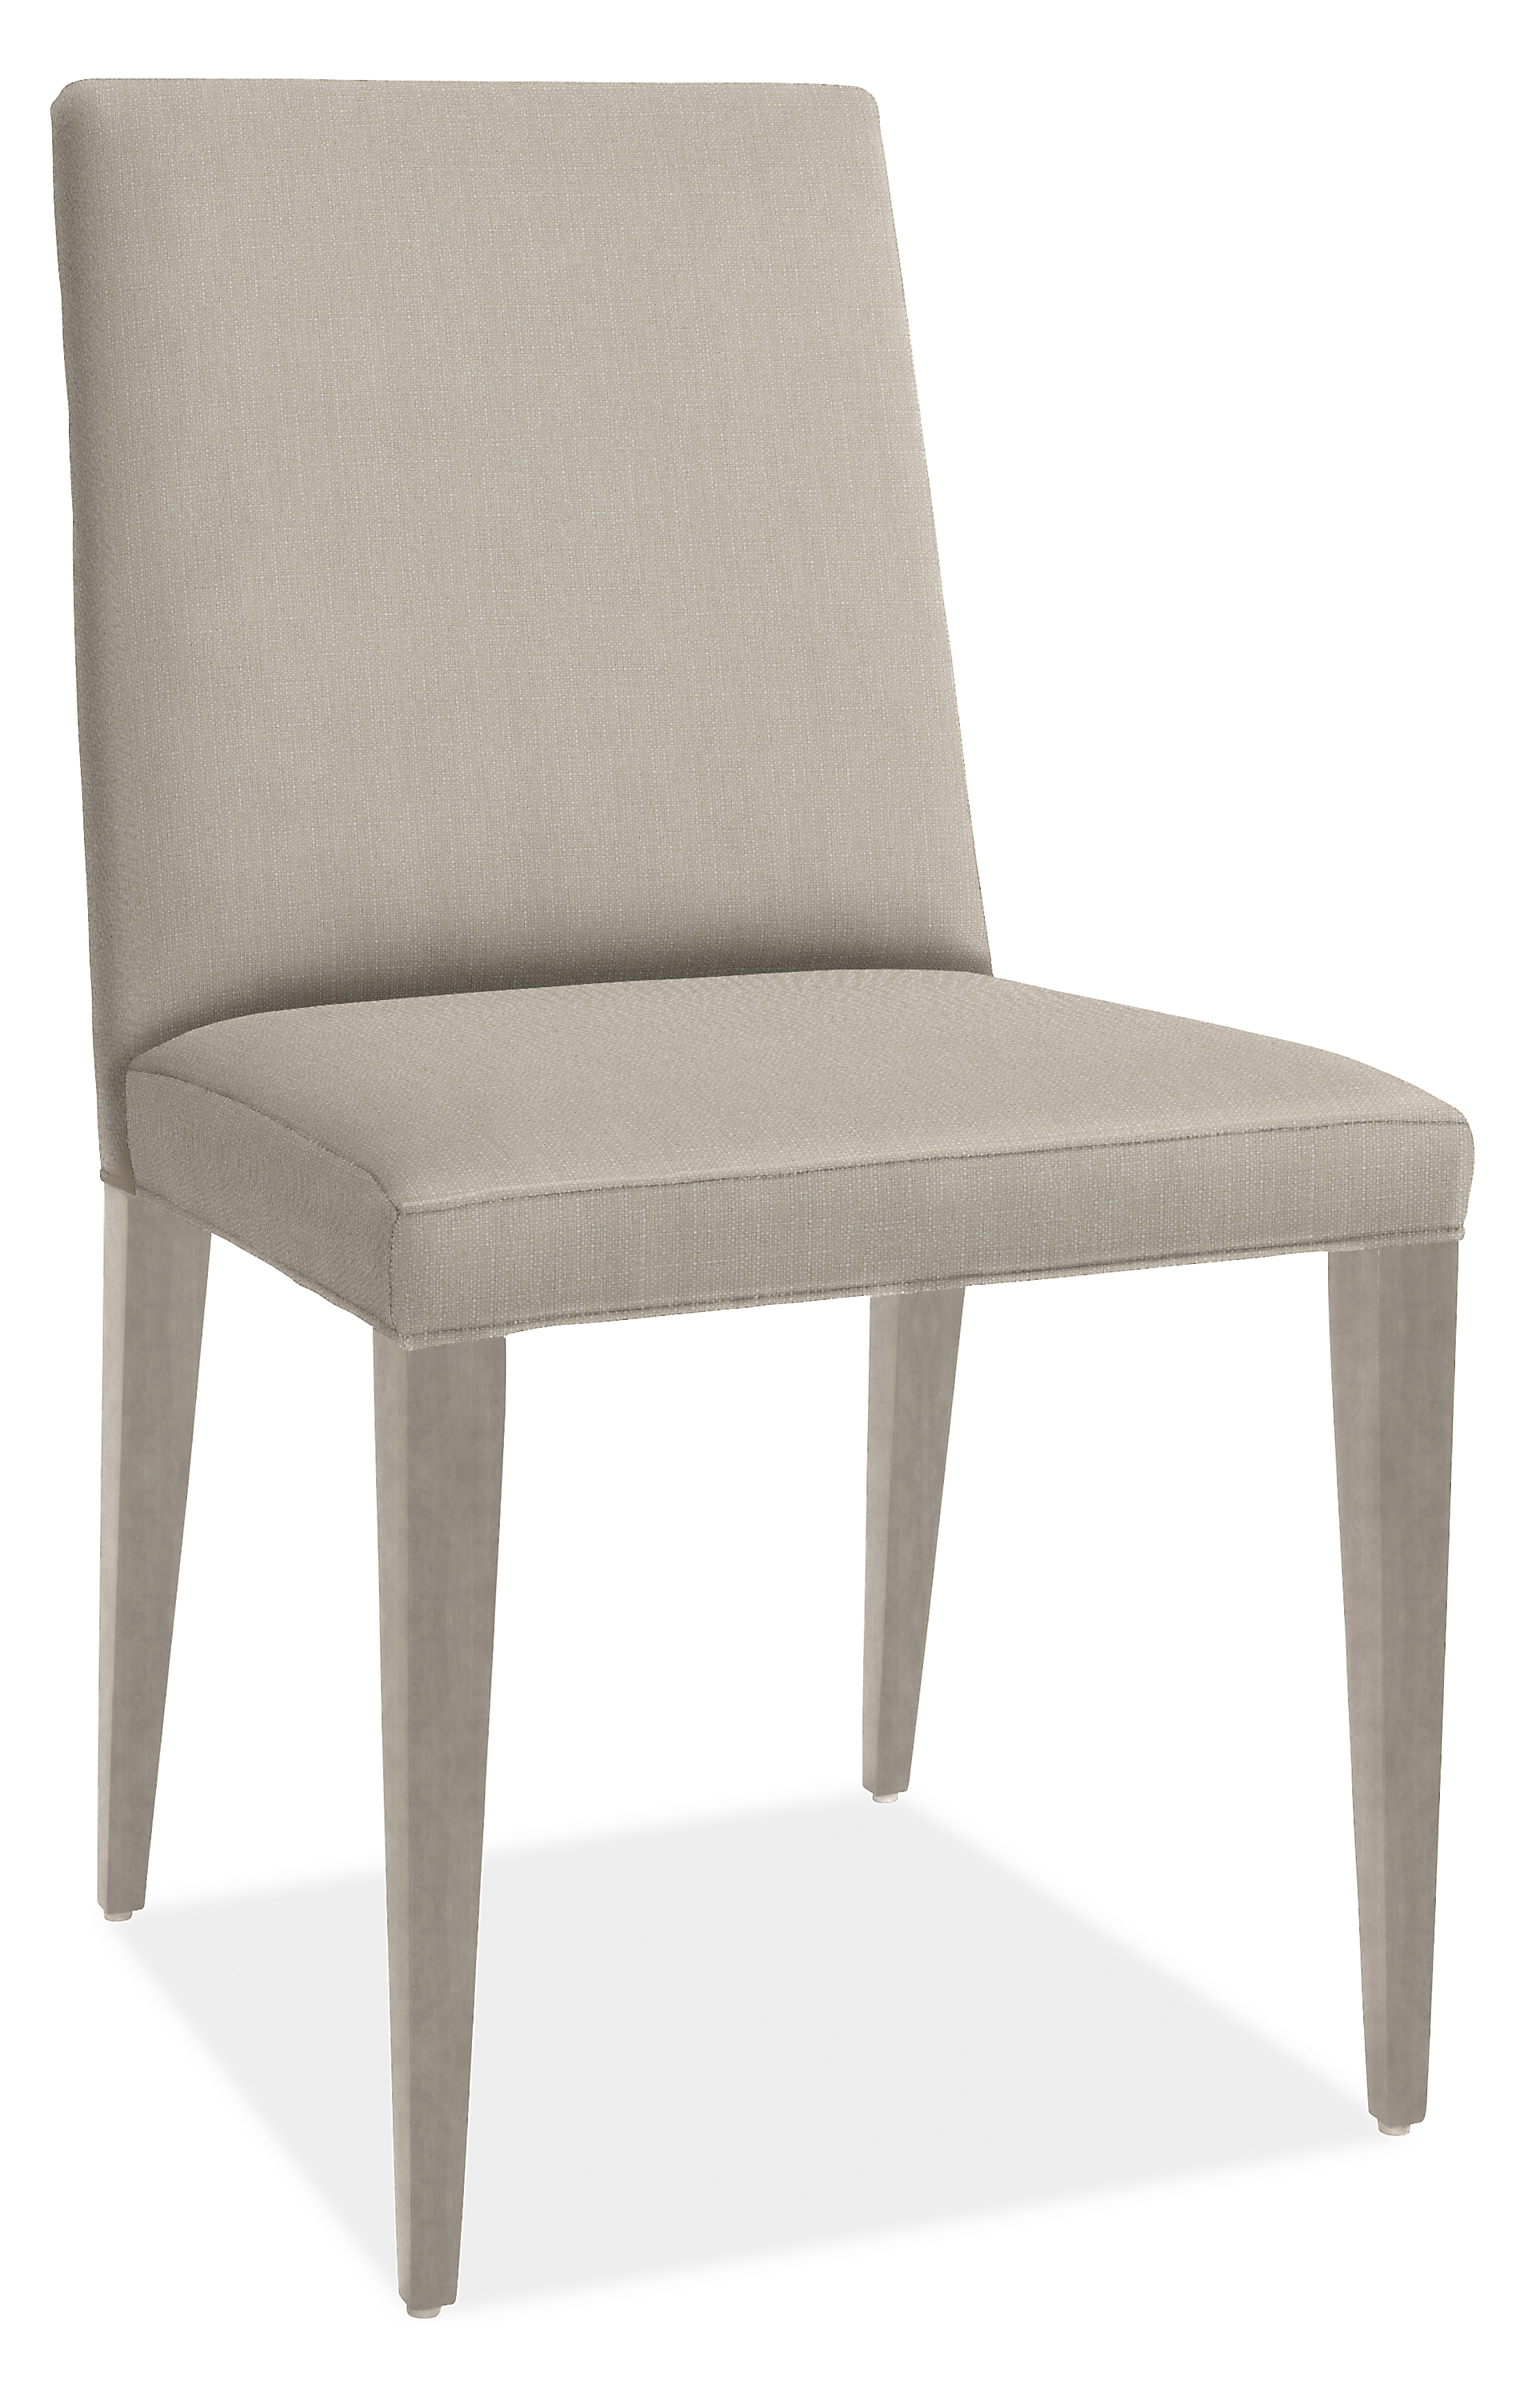 Ava High-Back Side Chair in Hines Oatmeal Shell Legs